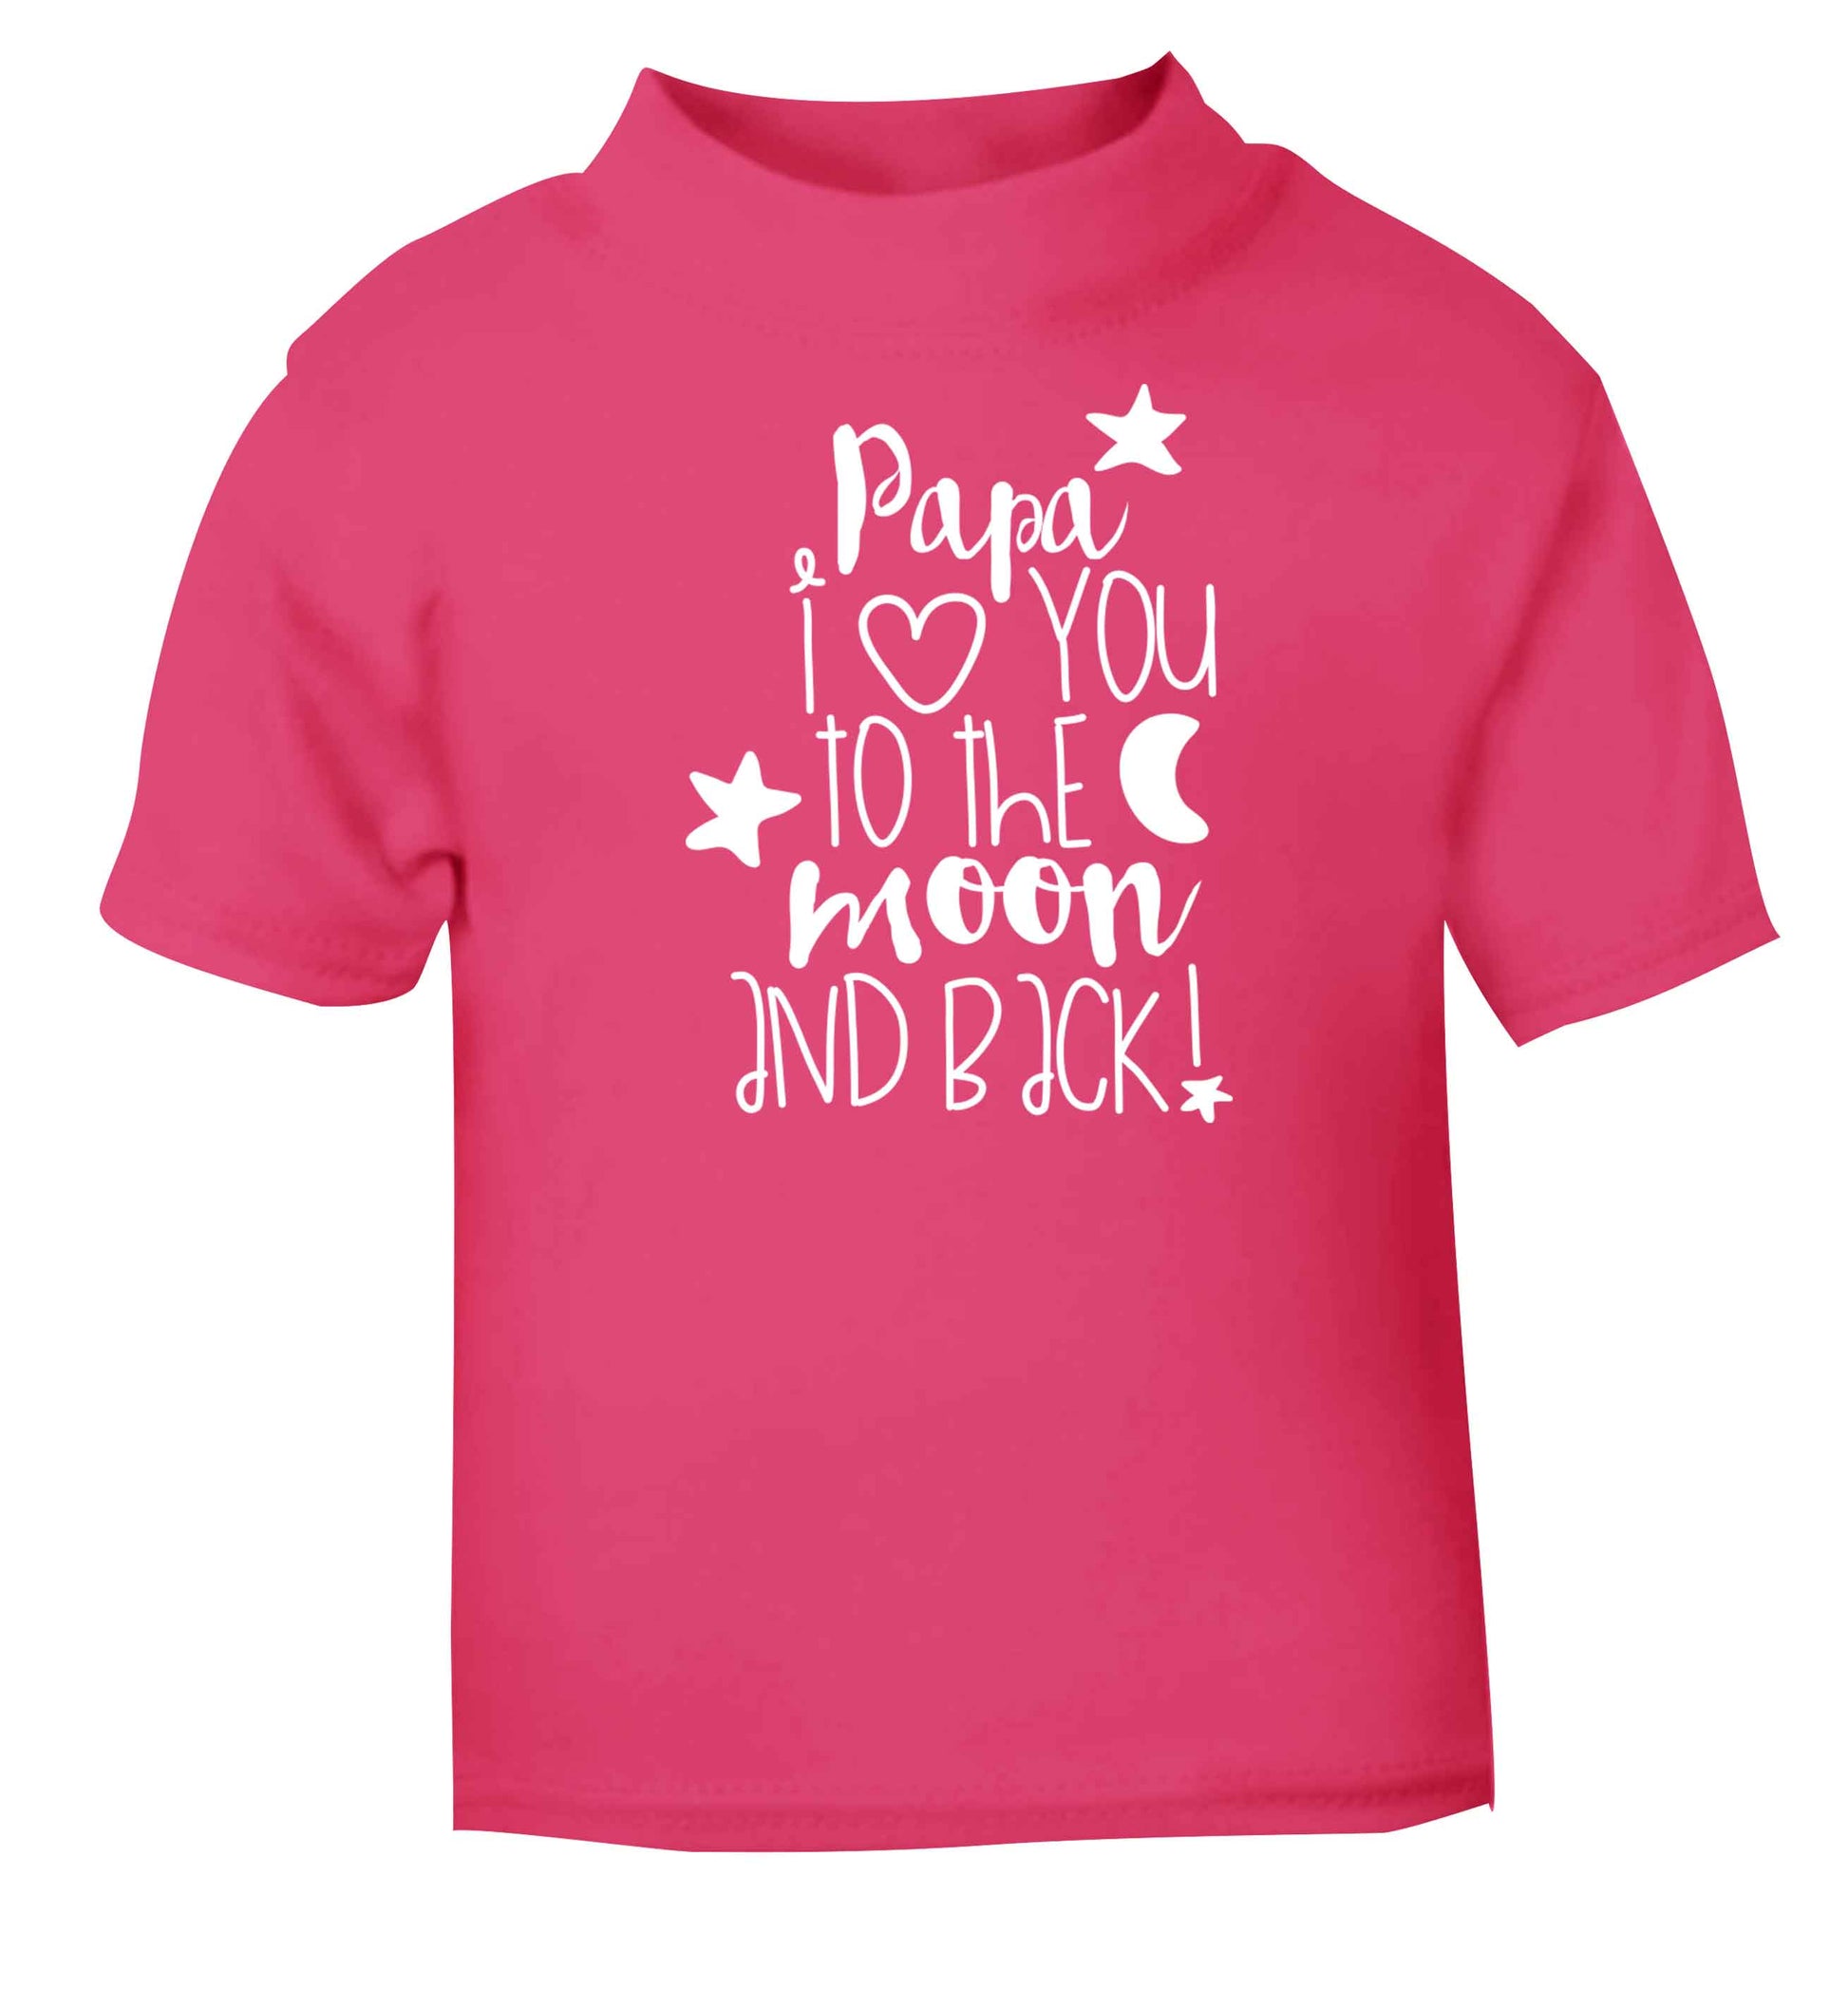 Papa I love you to the moon and back pink baby toddler Tshirt 2 Years